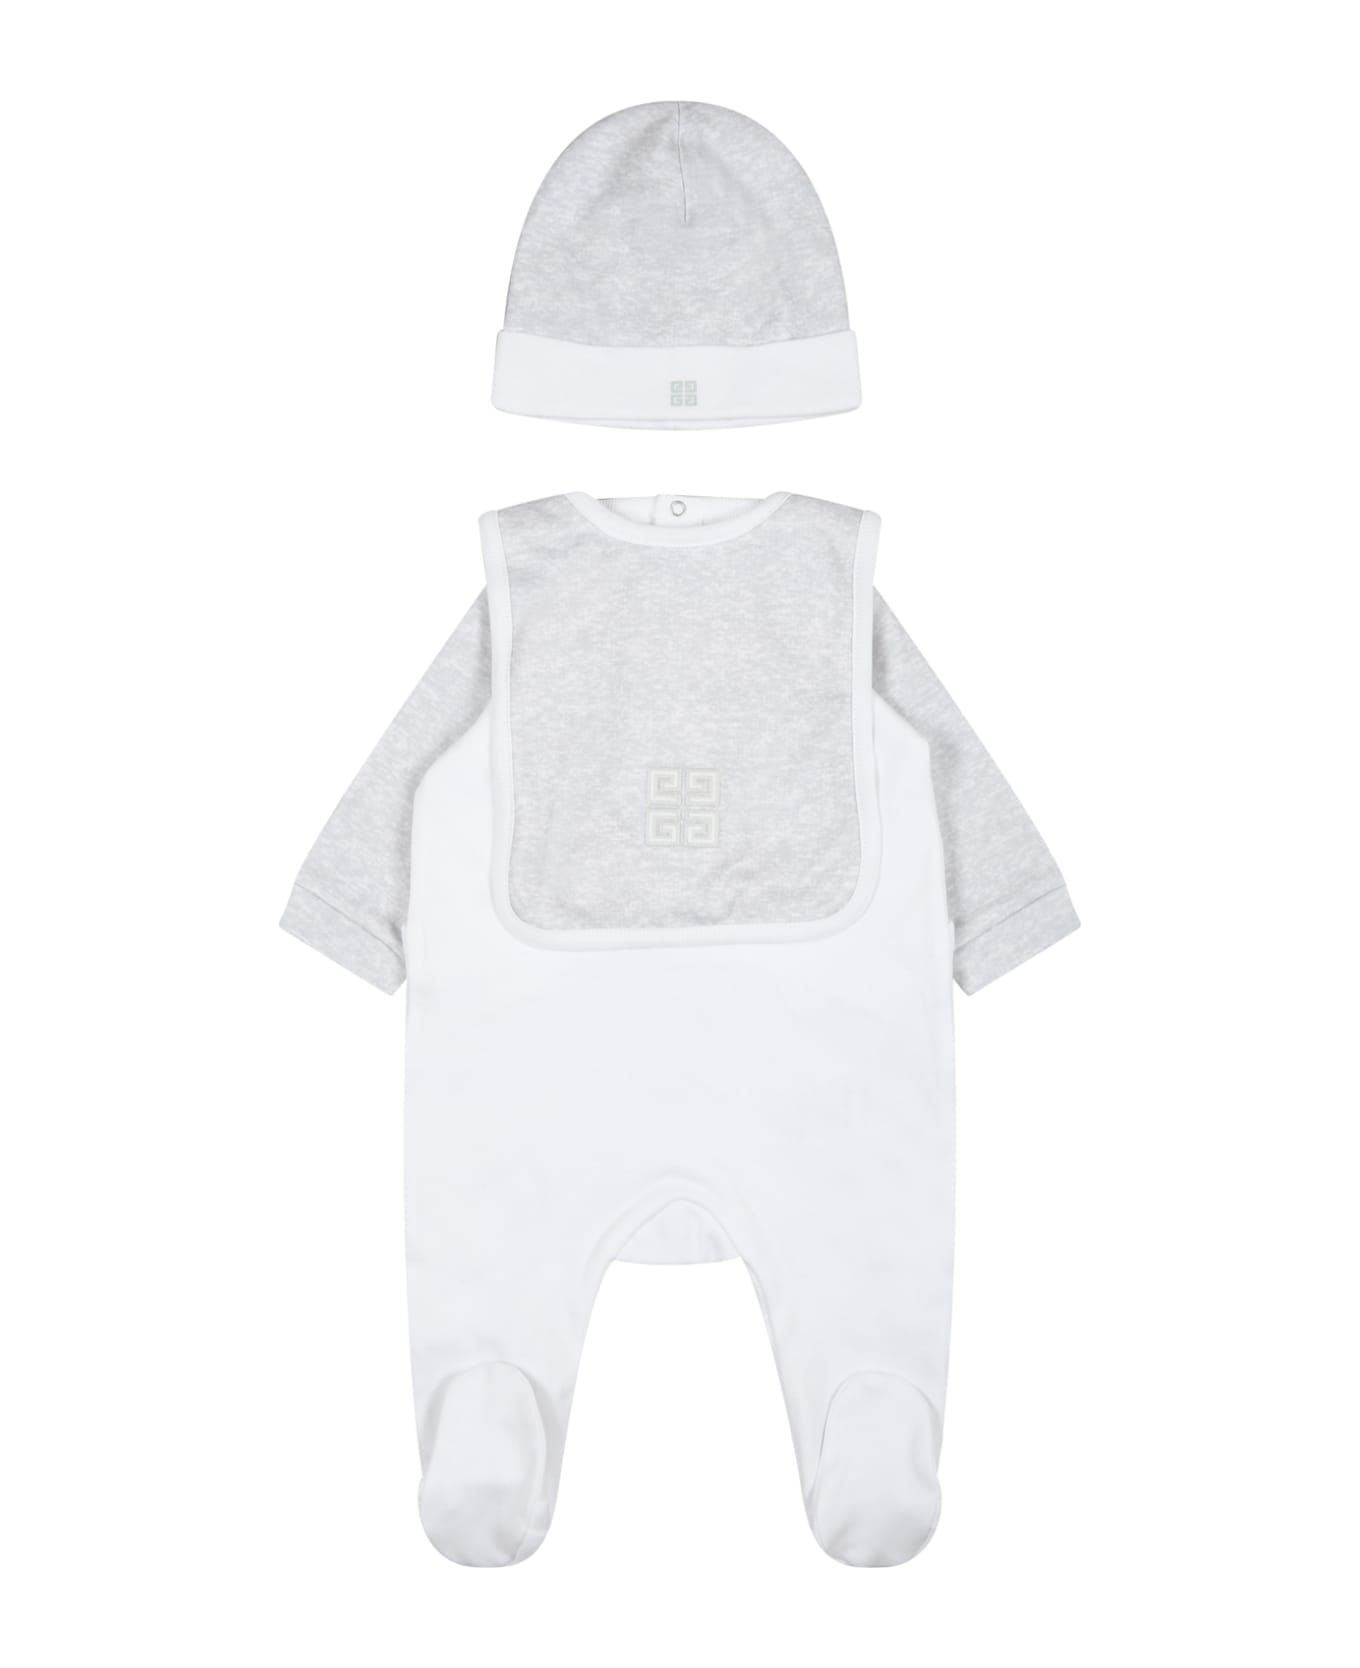 Givenchy Multicolor Set For Babies With Logo - White